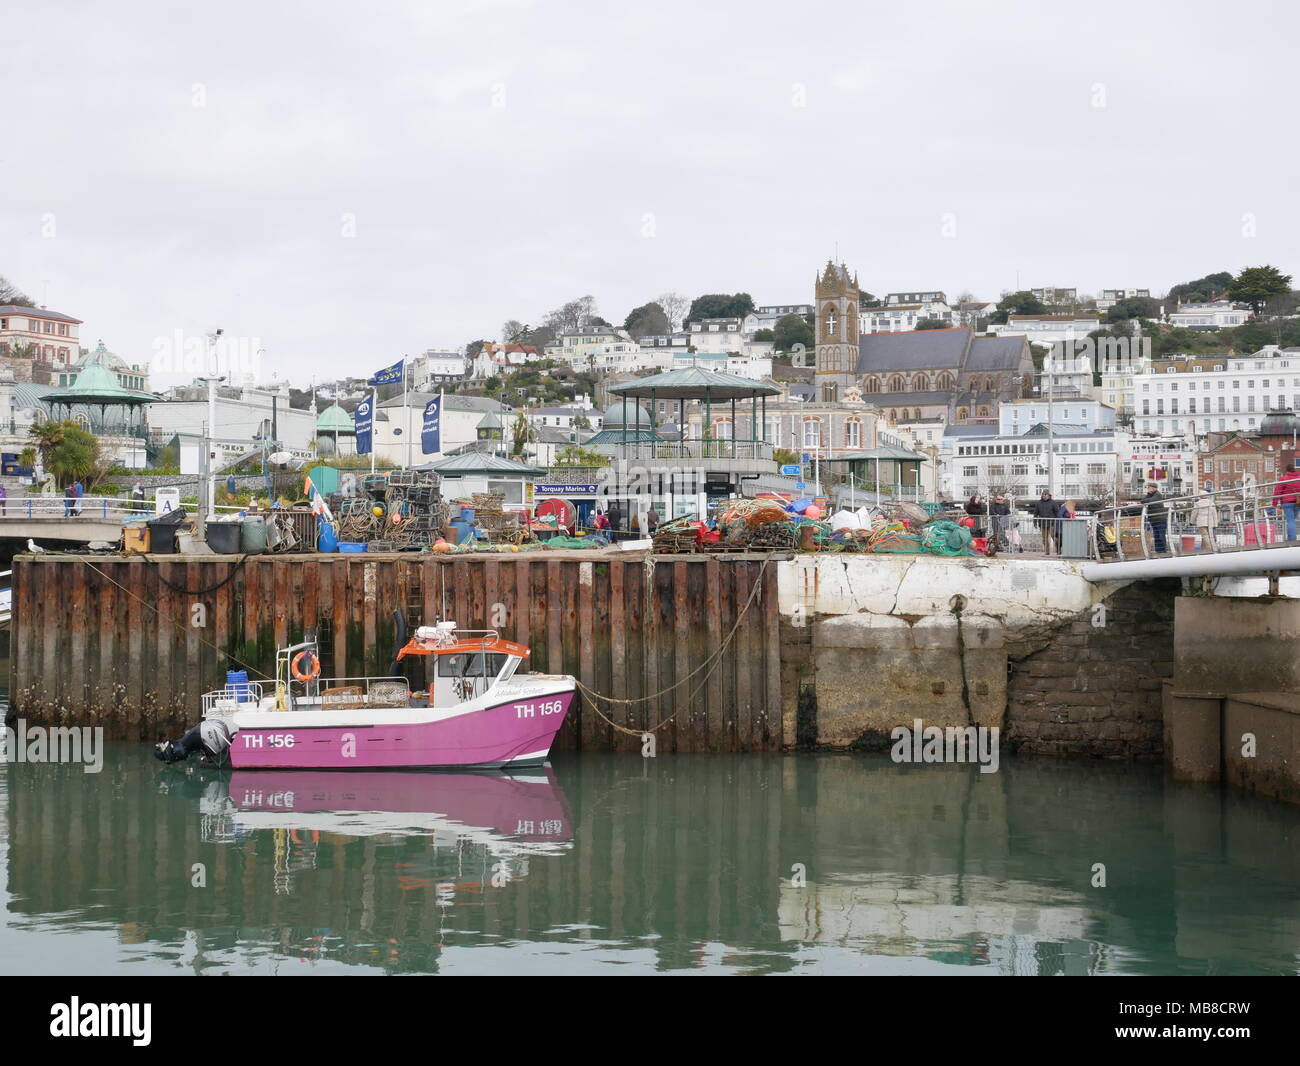 Fishing boat at harbour in Torquay, South West England, UK. Stock Photo